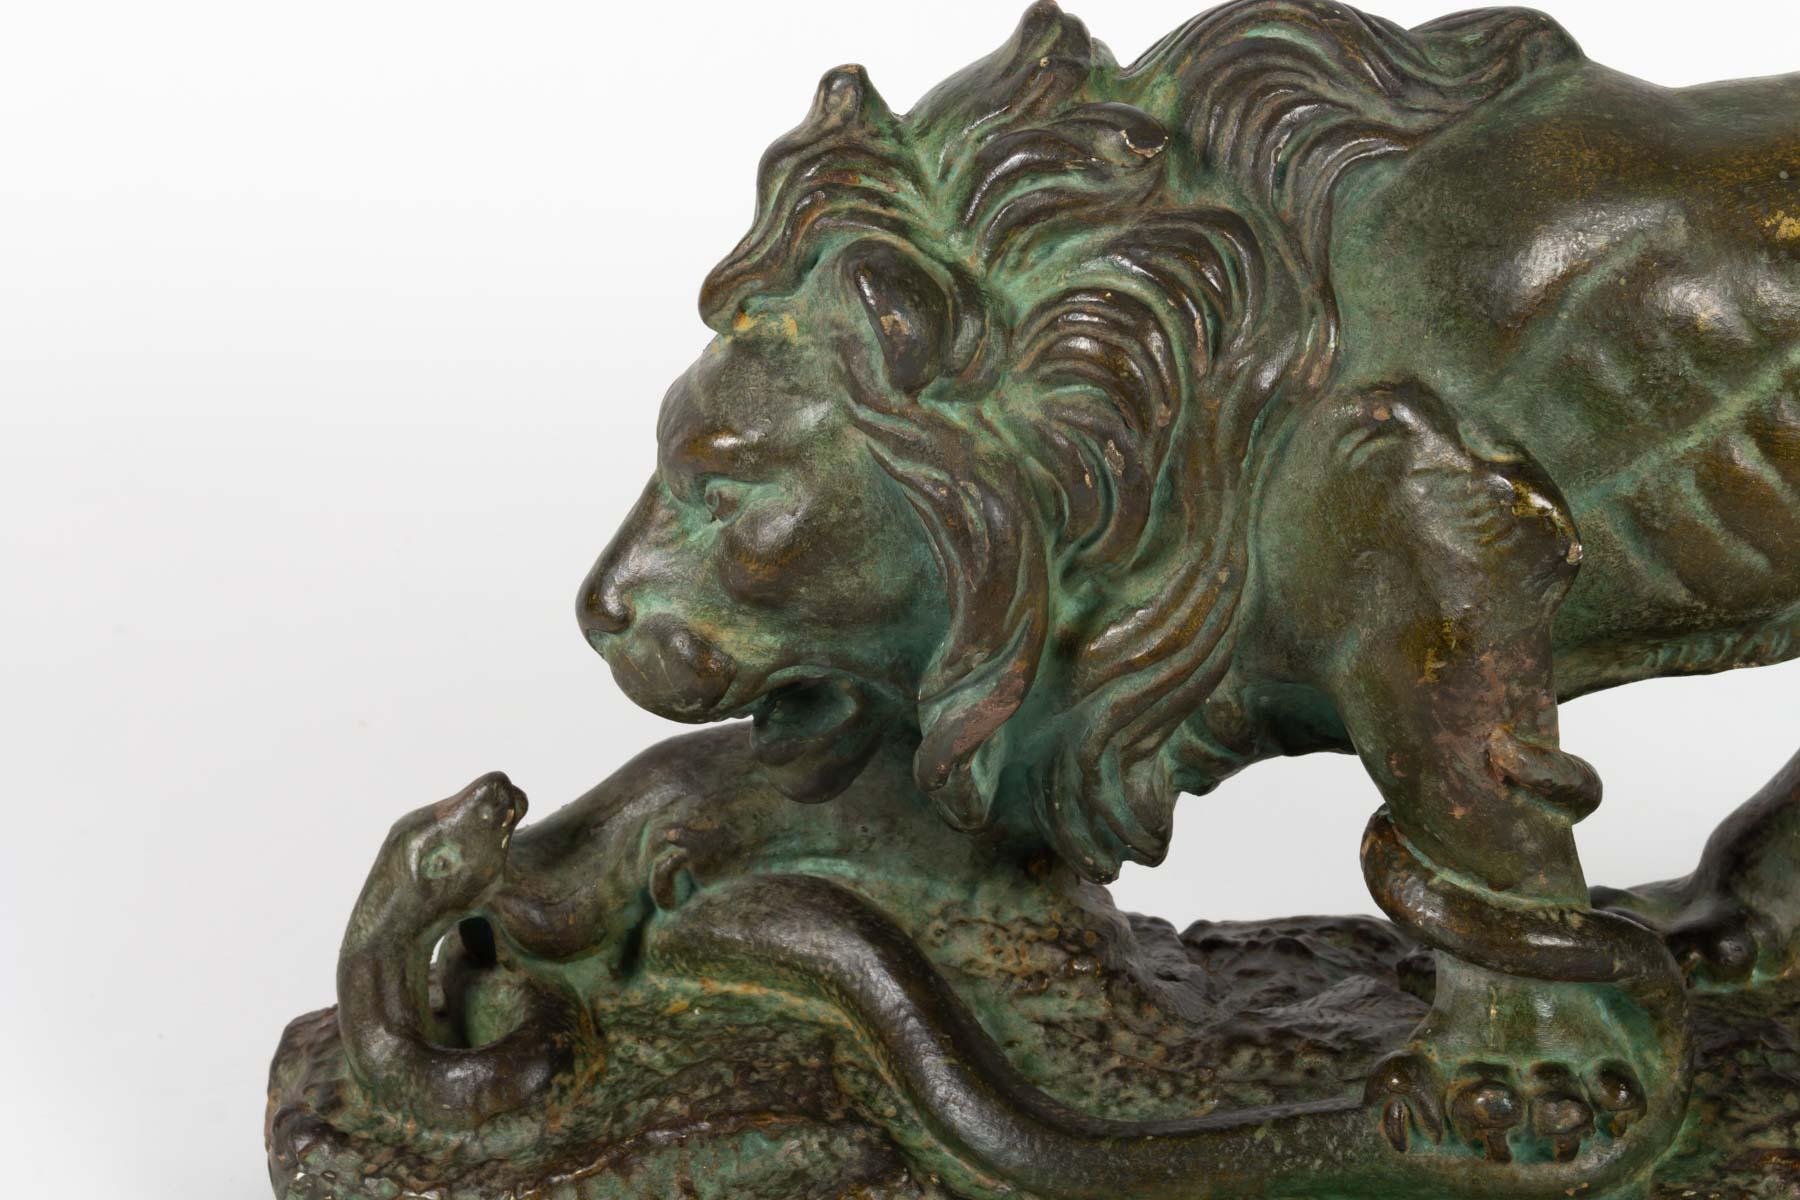 Beautiful original plaster sculpture, lion and snake, by Romeo Capovani, Italy, circa 1925
with a bronze patina.
Signed
Romeo Capovani is known, amongst other works, for his monument honoring the dead soldiers of WW1 in Cucigliana in Tuscany, and